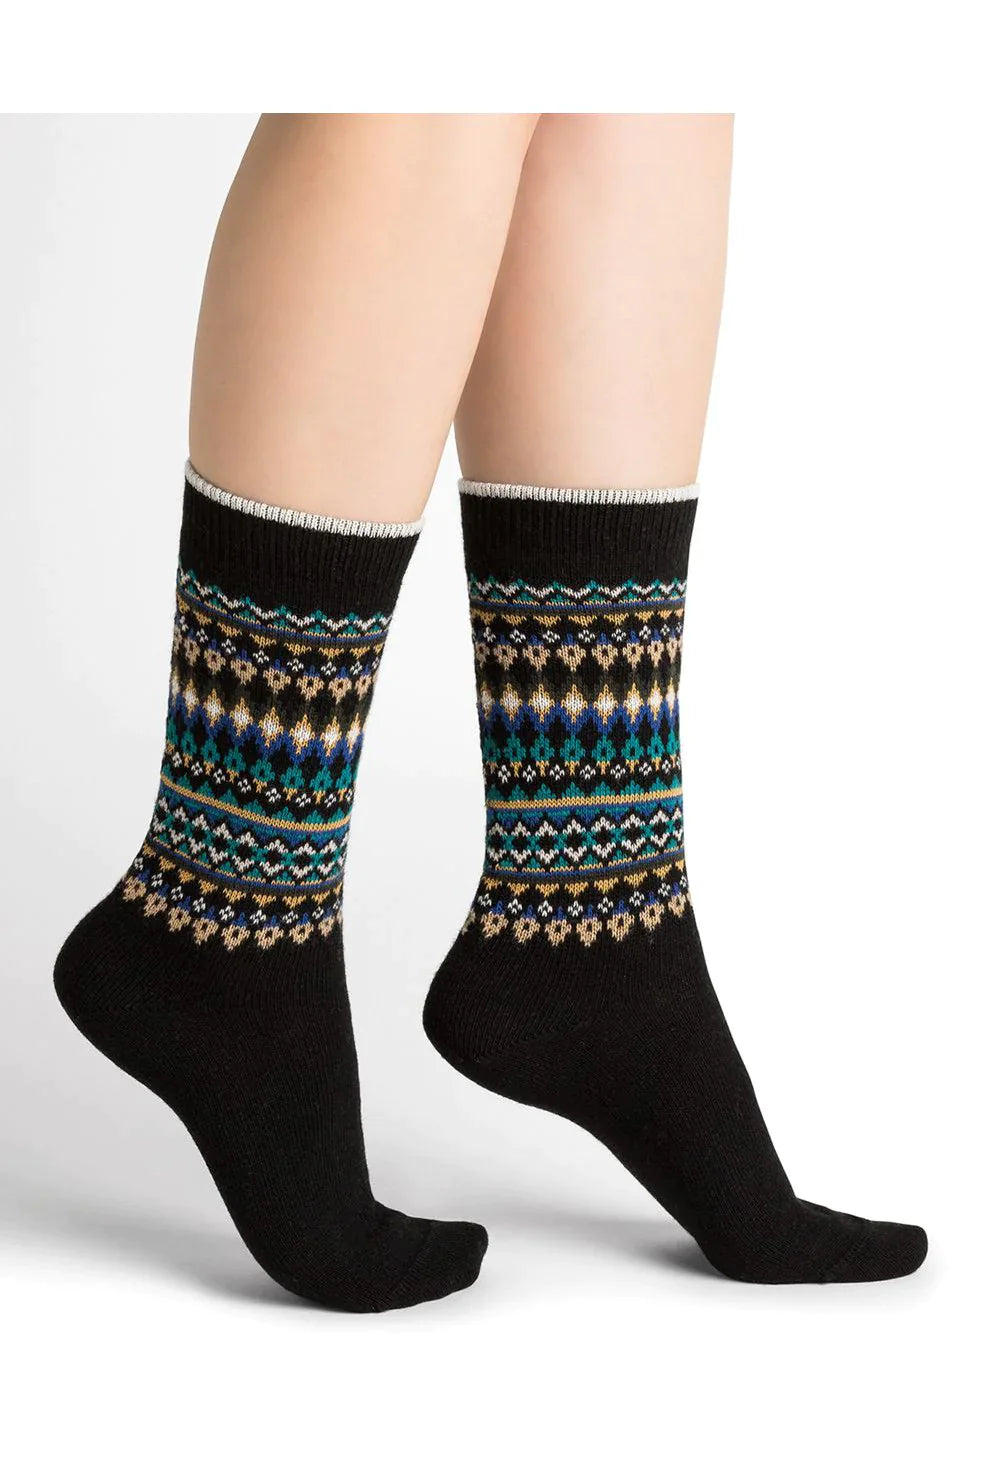 A pair of Bleuforet 6317 Jacquard Cashmere Blend Socks with multicolored Shetland style designs.